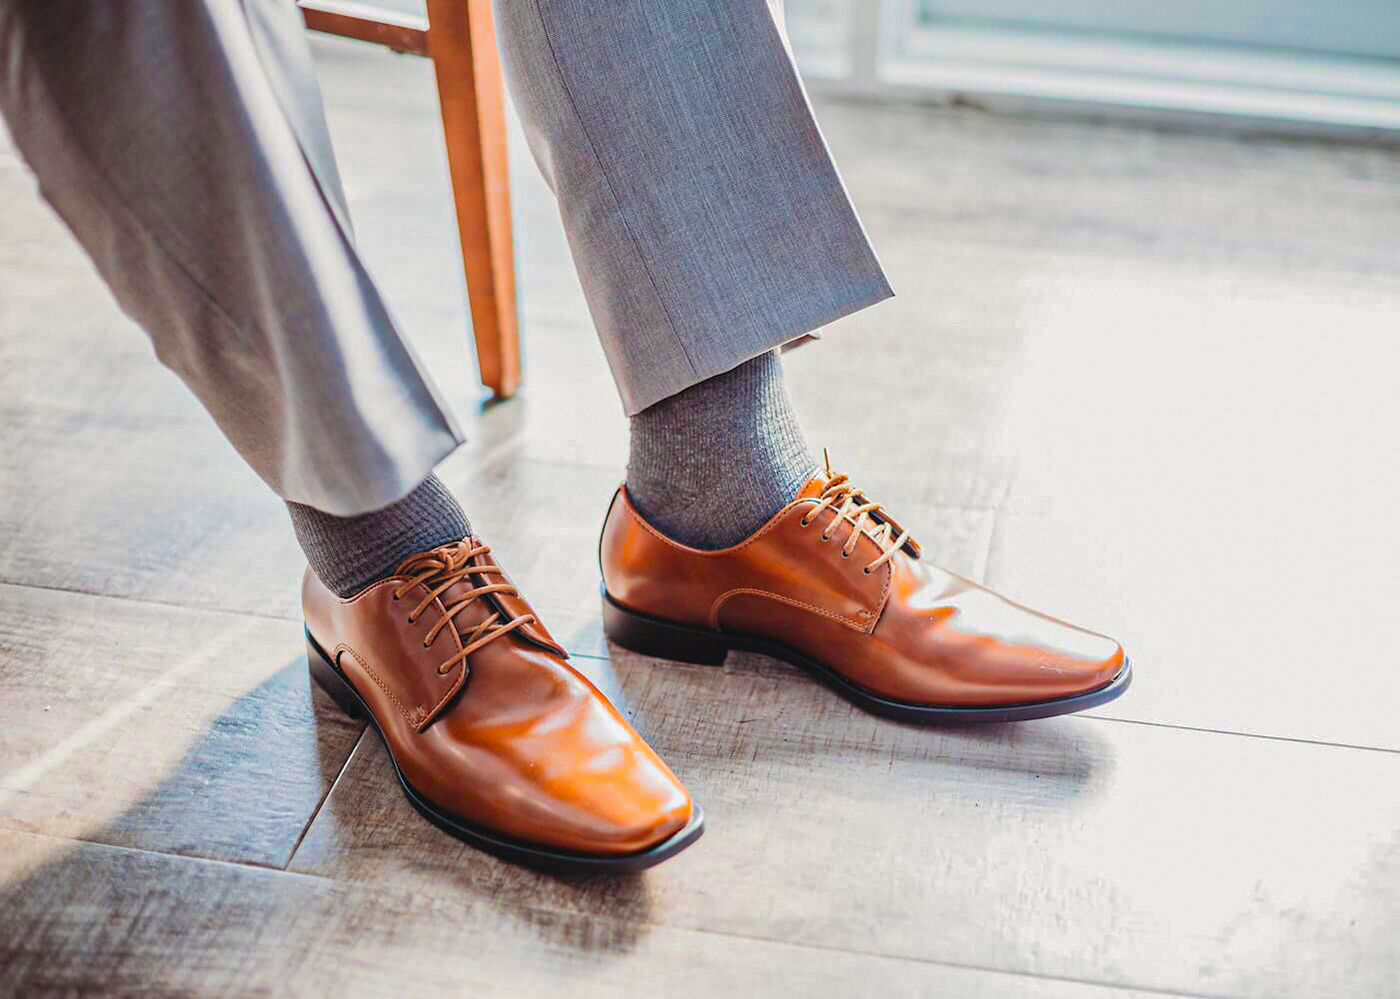 Medium brown derby shoes with medium gray dress pants